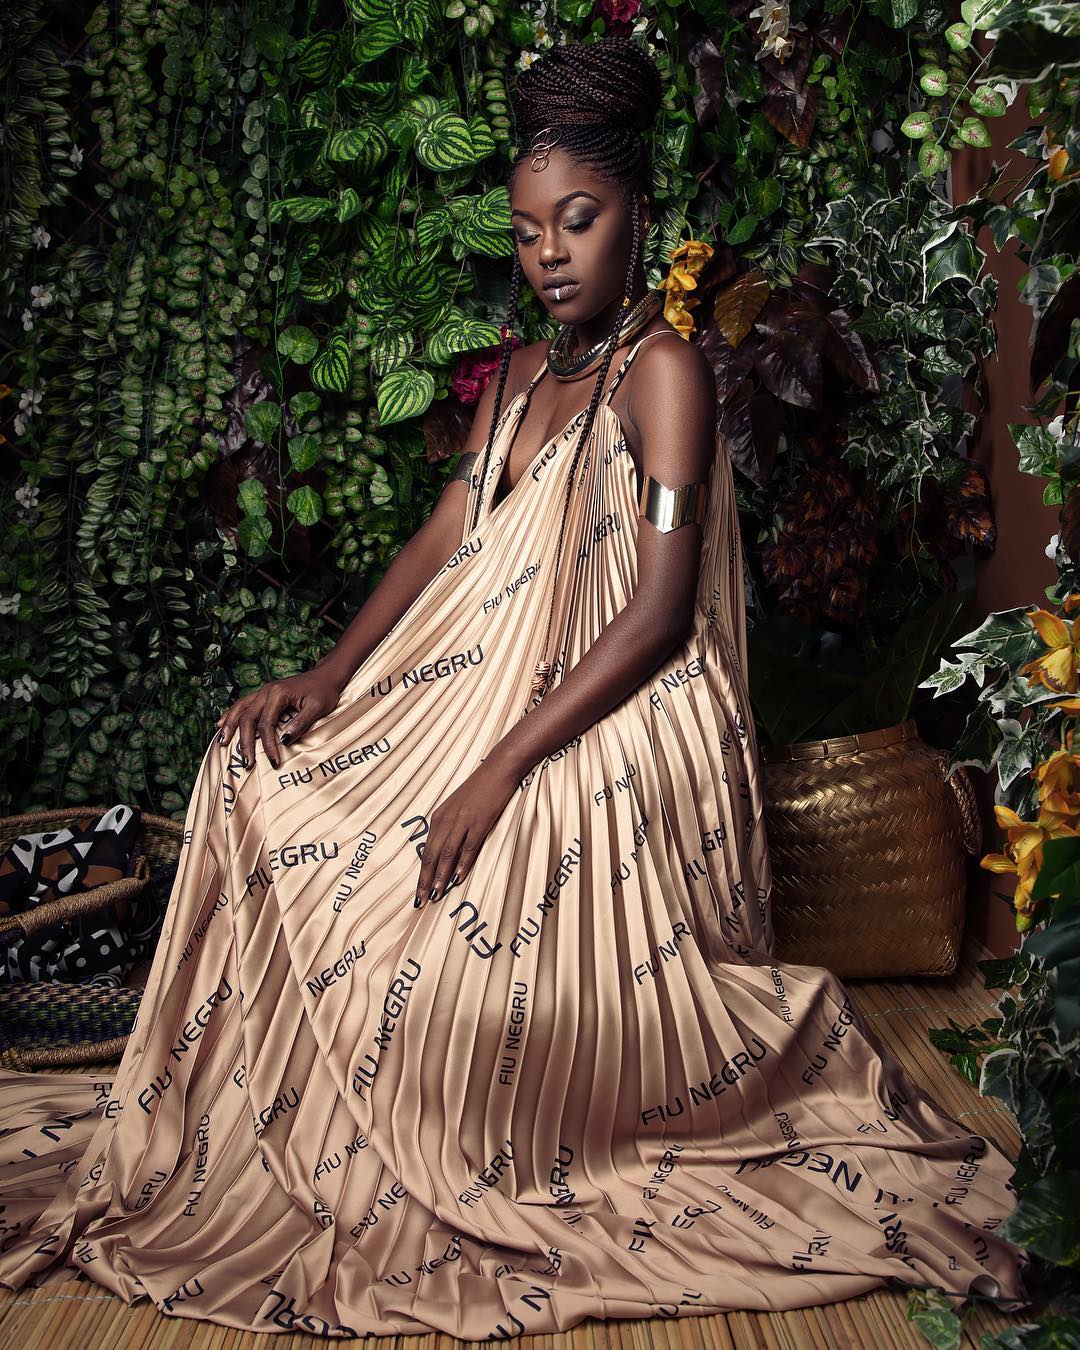 Stop Everything: Angolan Brand Fiu Negru’s New Collection is The Best Thing You’ll See this Week